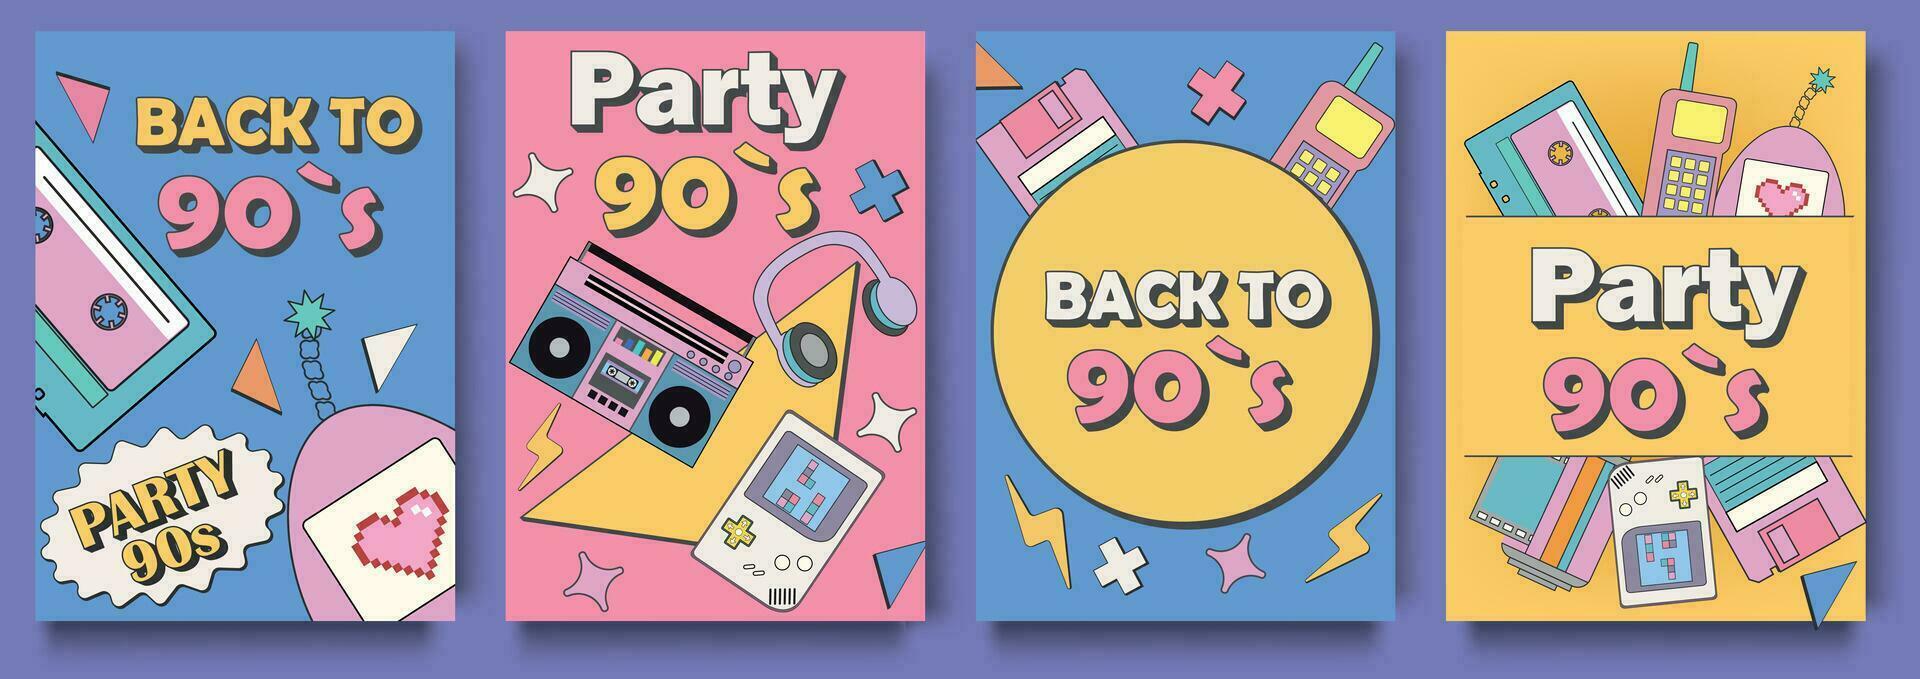 Back to 90s party cover brochure set in flat design. Poster templates with happy nineties symbols, neo brutalism, gamepad and devices, headphones and other retro pop culture signs. Vector illustration